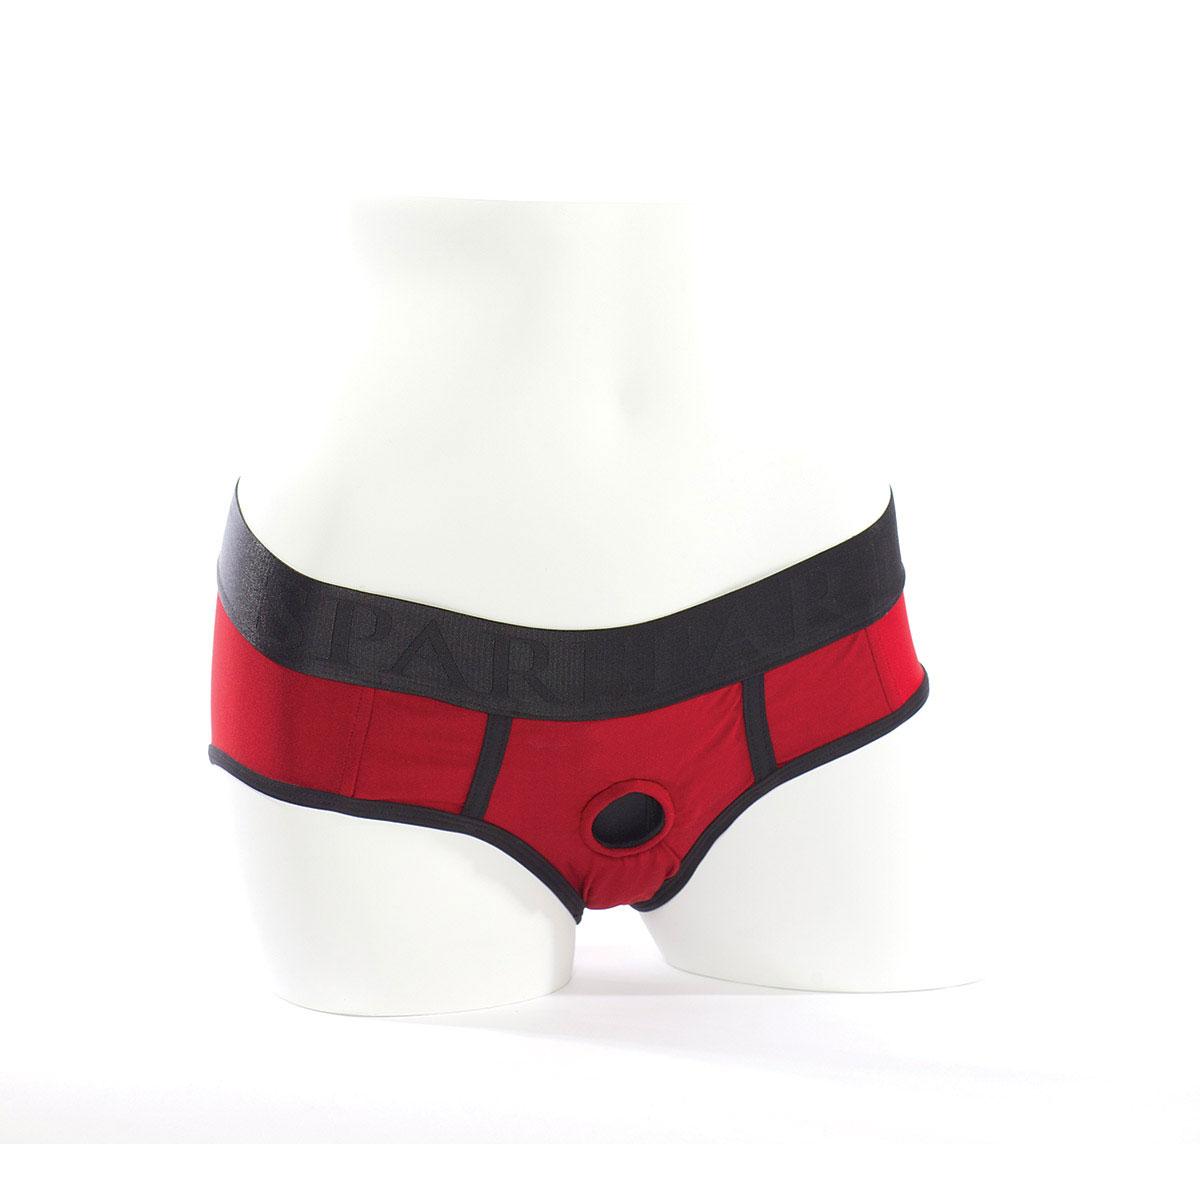 SpareParts Tomboi Harness Red-Blk Nylon - Small